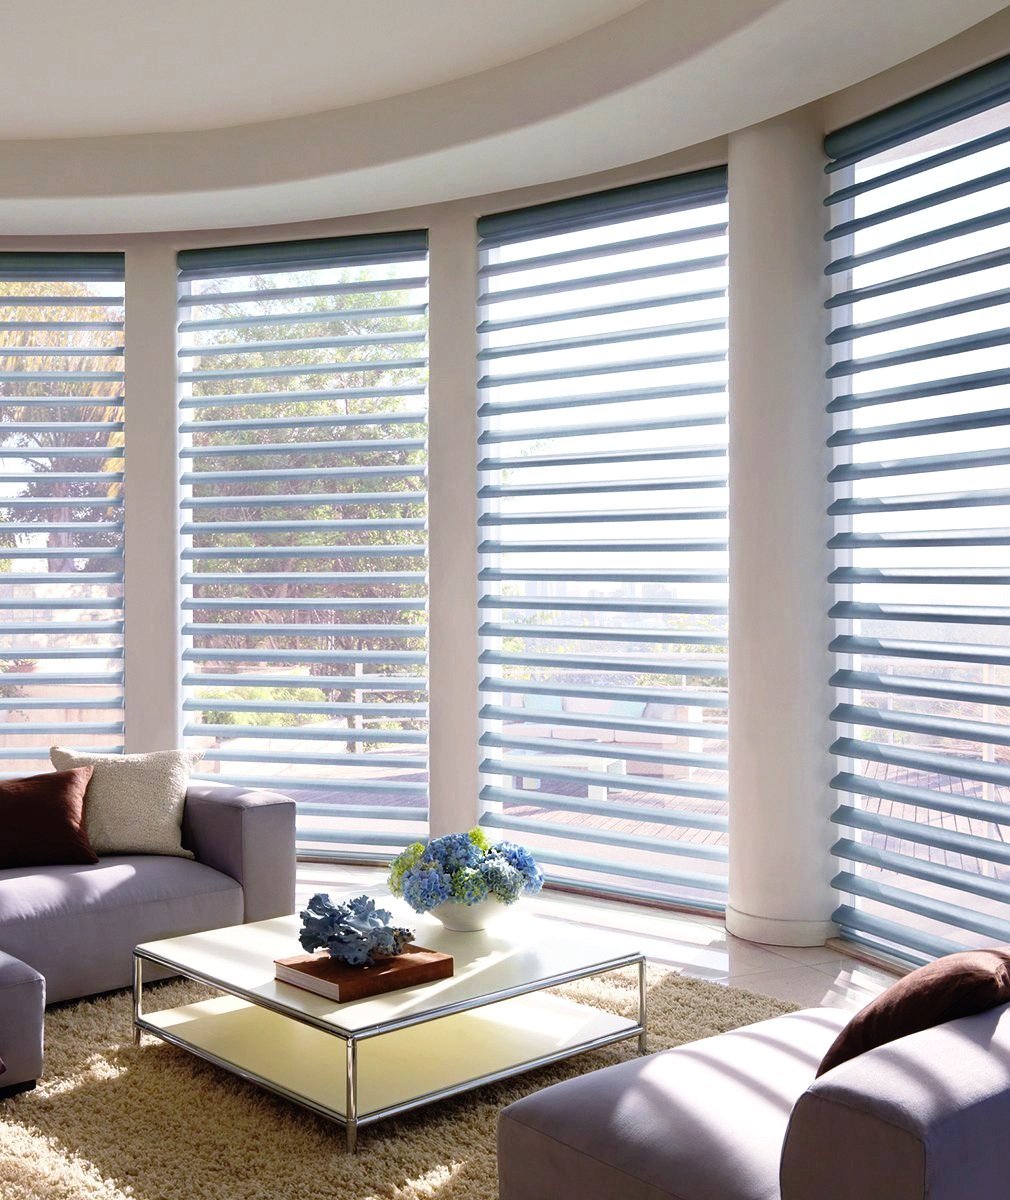 Hunter Douglas Window Treatments Pirouette in a Living Room. Available at JC Licht in Chicago, IL